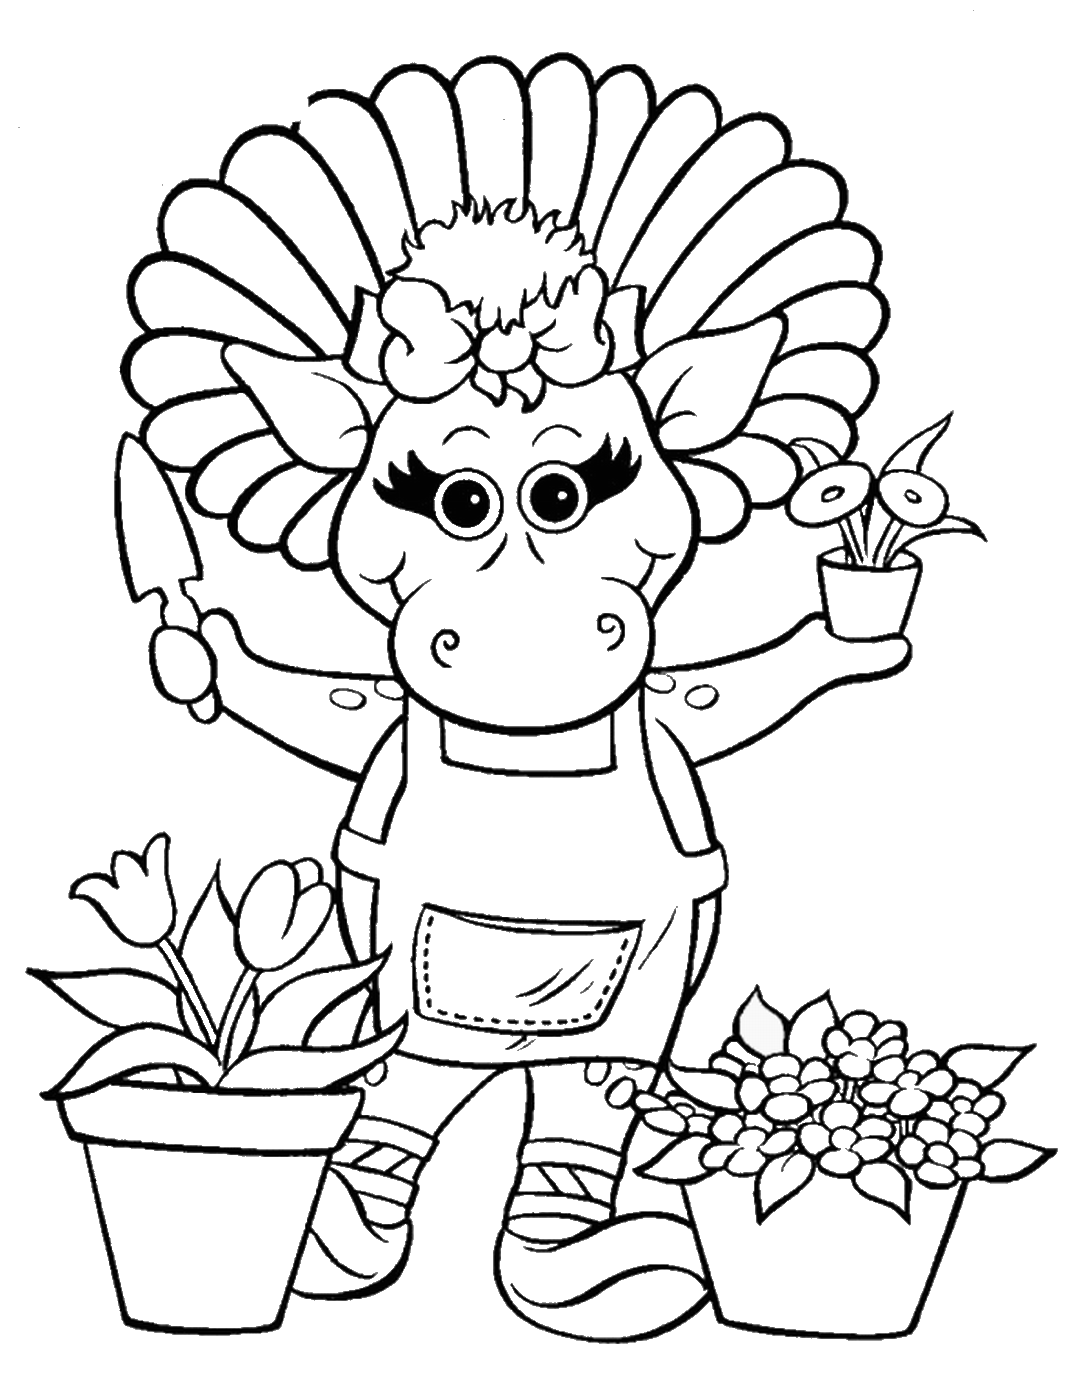 Barney and Friends Coloring Pages TV Film barney_cl_1066 Printable 2020 00632 Coloring4free